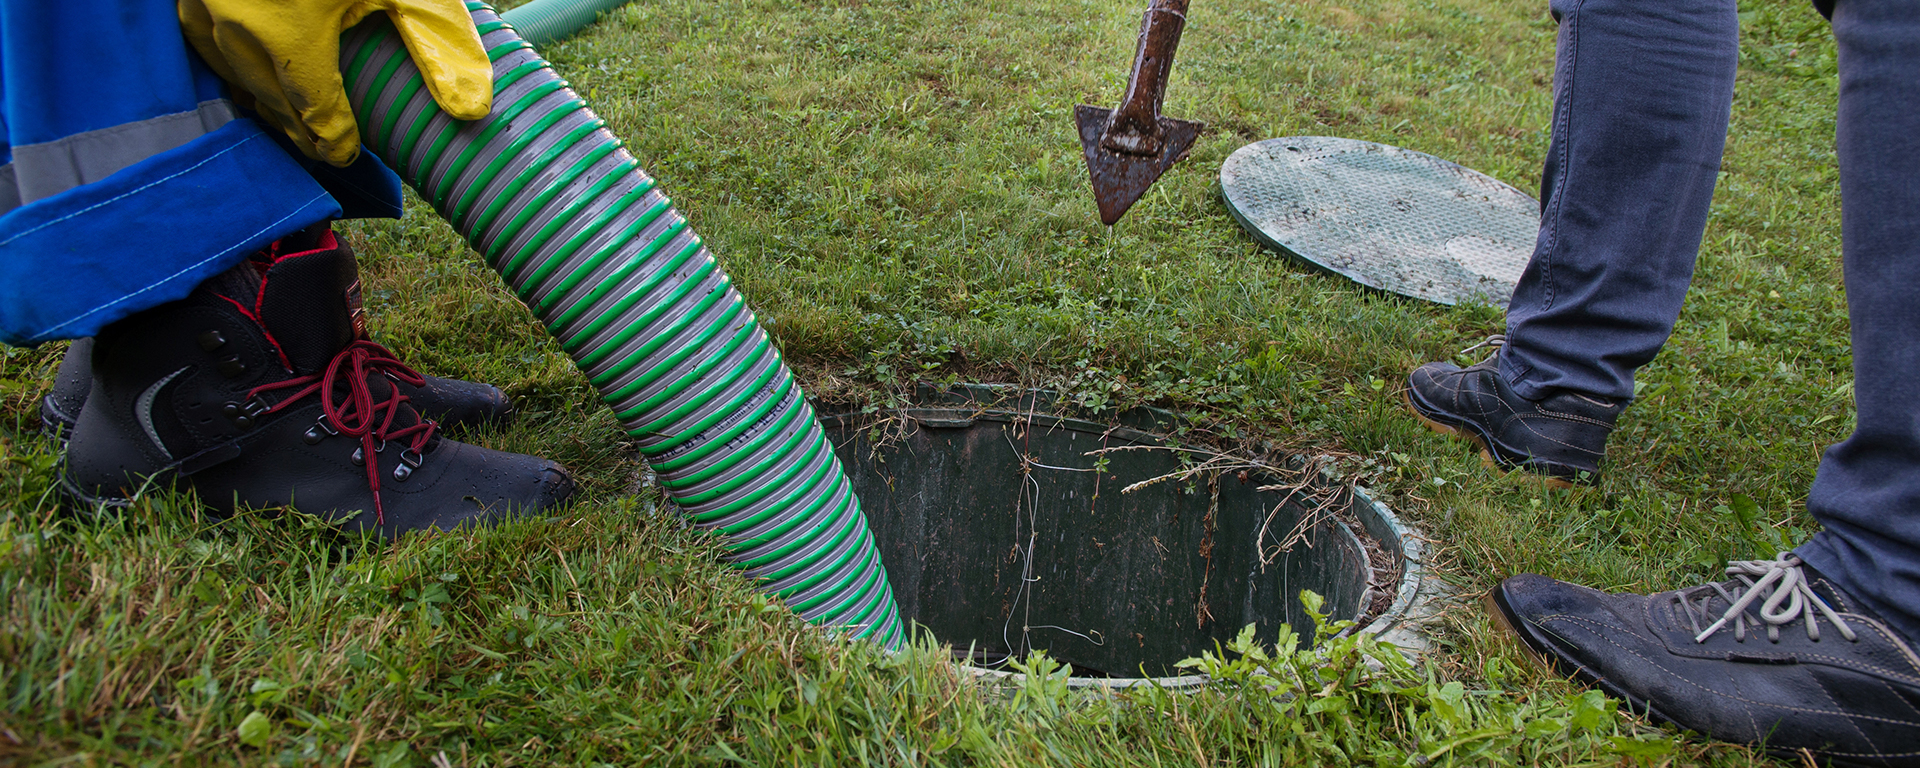 image of septic tank opening